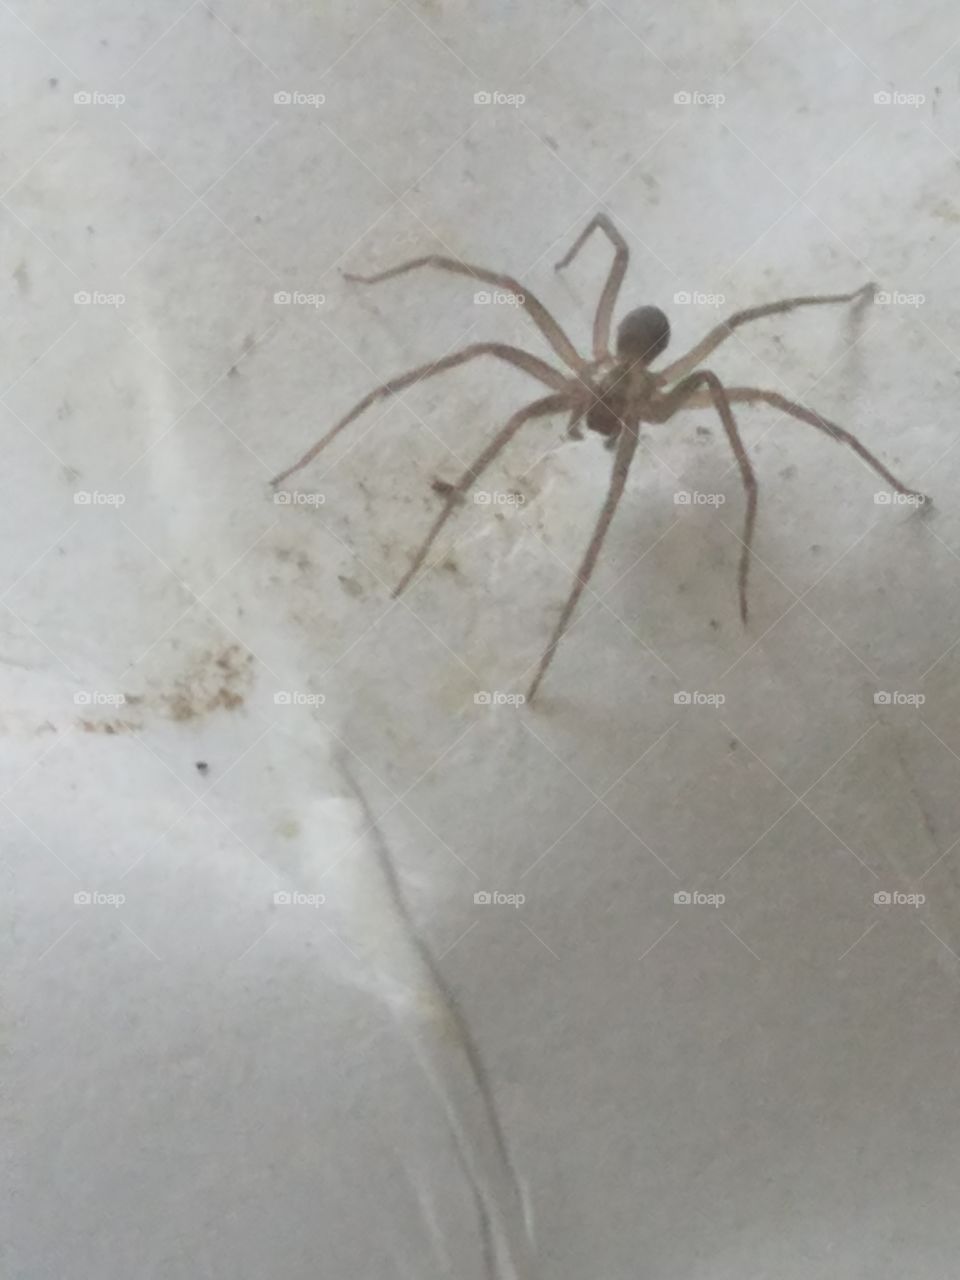 A scary brown recluse spider